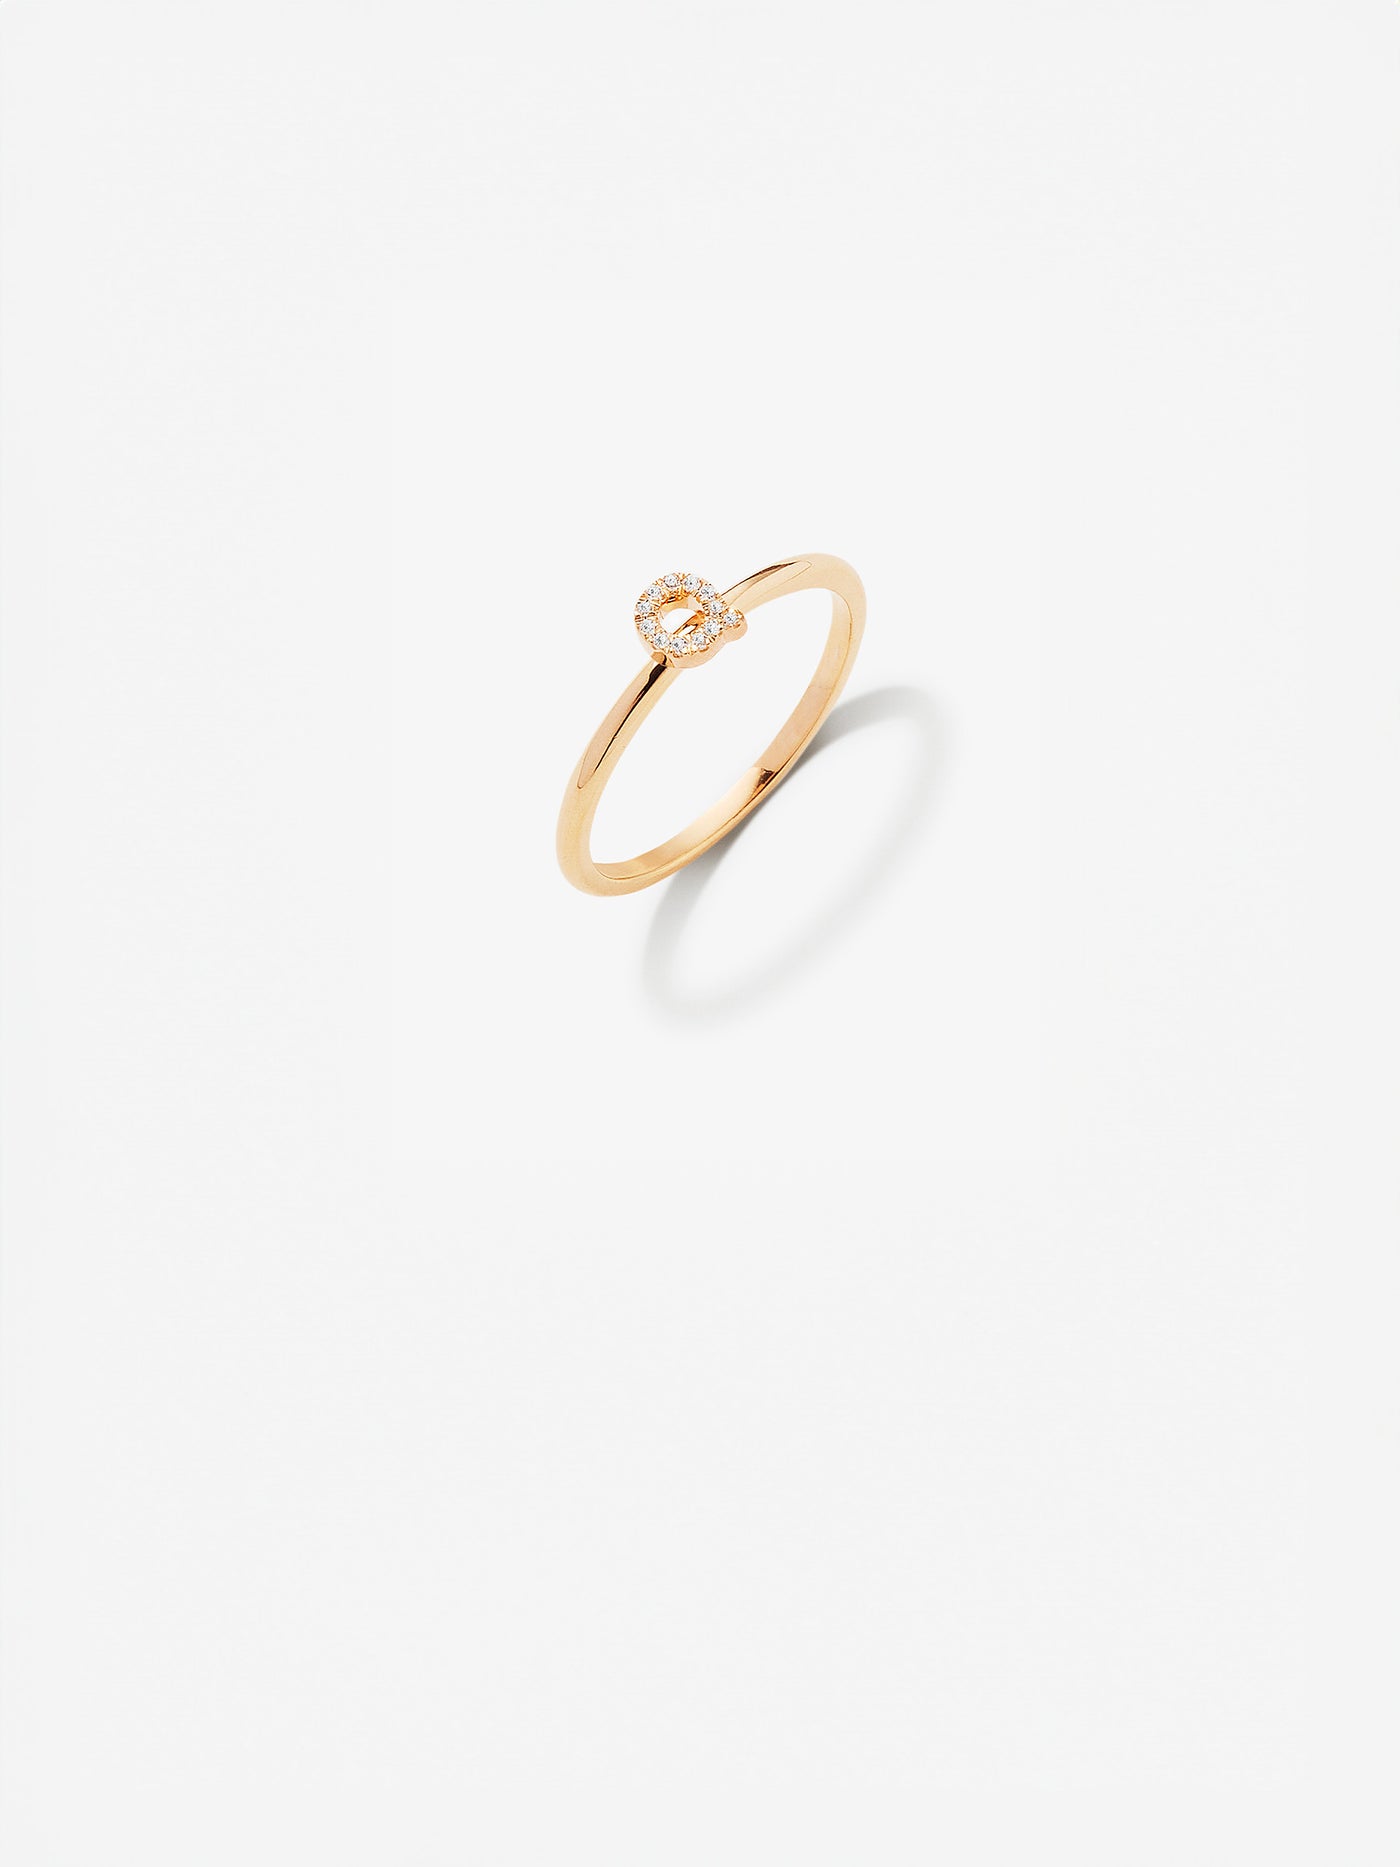 Letter Q Ring in Diamonds and 18k Gold